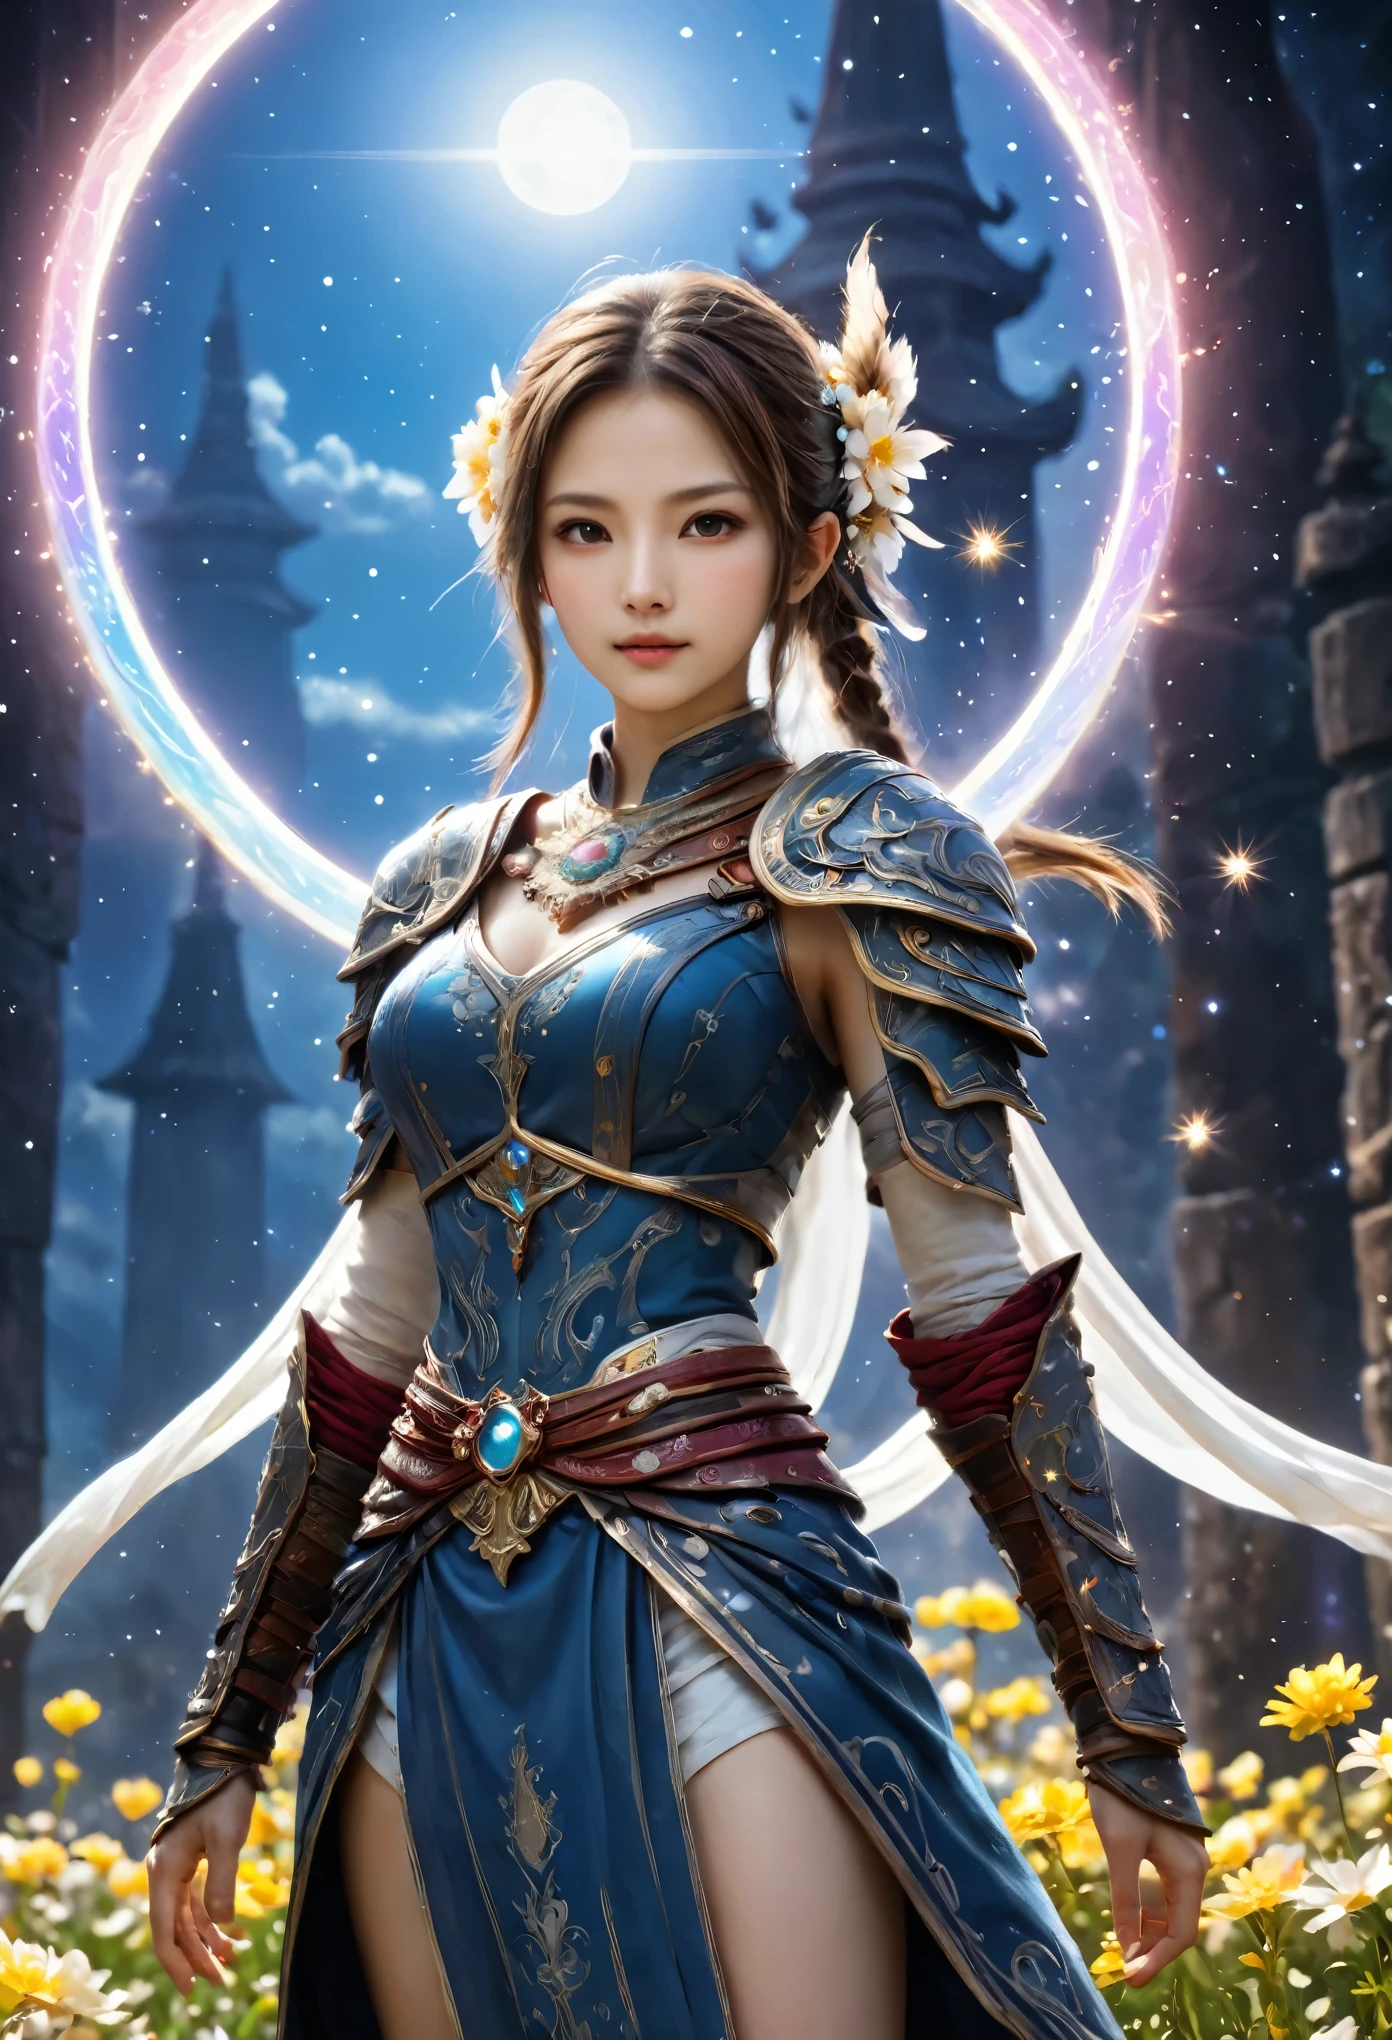 8K resolution, masterpiece, Highest quality, Award-winning works, unrealistic, final fantasy, Royal Jewel,Photorealistic Painting by Midjourney and Greg Rutkowski, , elegant, Very detailed, Delicate depiction of hair, miniature painting, Digital Painting, Art Station, Concept Art, Smooth, Sharp focus, shape, nature, Clear shadows, Full body portrait, Asura, God of War, Castle in the Sky, A strip of light pouring down from the sky, A pillar of light stretching to the sky, Complex colors, Buddhist Mandala, Colorful magic circle, flash, Mysterious Background, Aura, A gentle gaze, BREAK, Small faint lights and flying fireflies, night, Starry Sky, milky way, nebula, shooting star, Flowers, birds, wind and moon,erotic, sole sexy lady, healthy shaped body, Anatomically accurate skeleton, 22 years old lady, Asura, 170cm tall, huge firm bouncing busts, Holy sword in both hands, Complicated armor, Brightly colored armor, battlefield, fight, dash